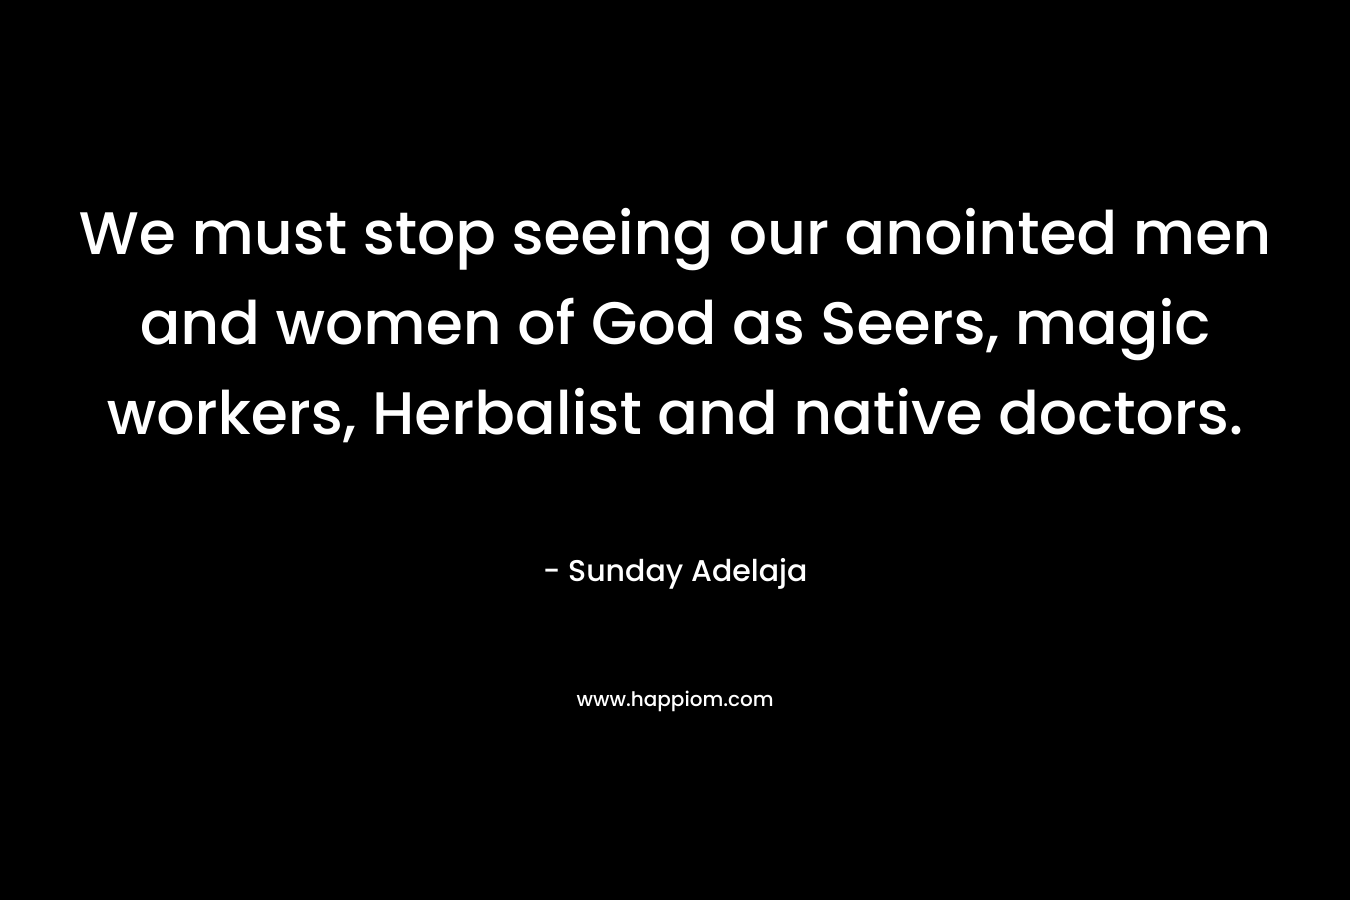 We must stop seeing our anointed men and women of God as Seers, magic workers, Herbalist and native doctors. – Sunday Adelaja